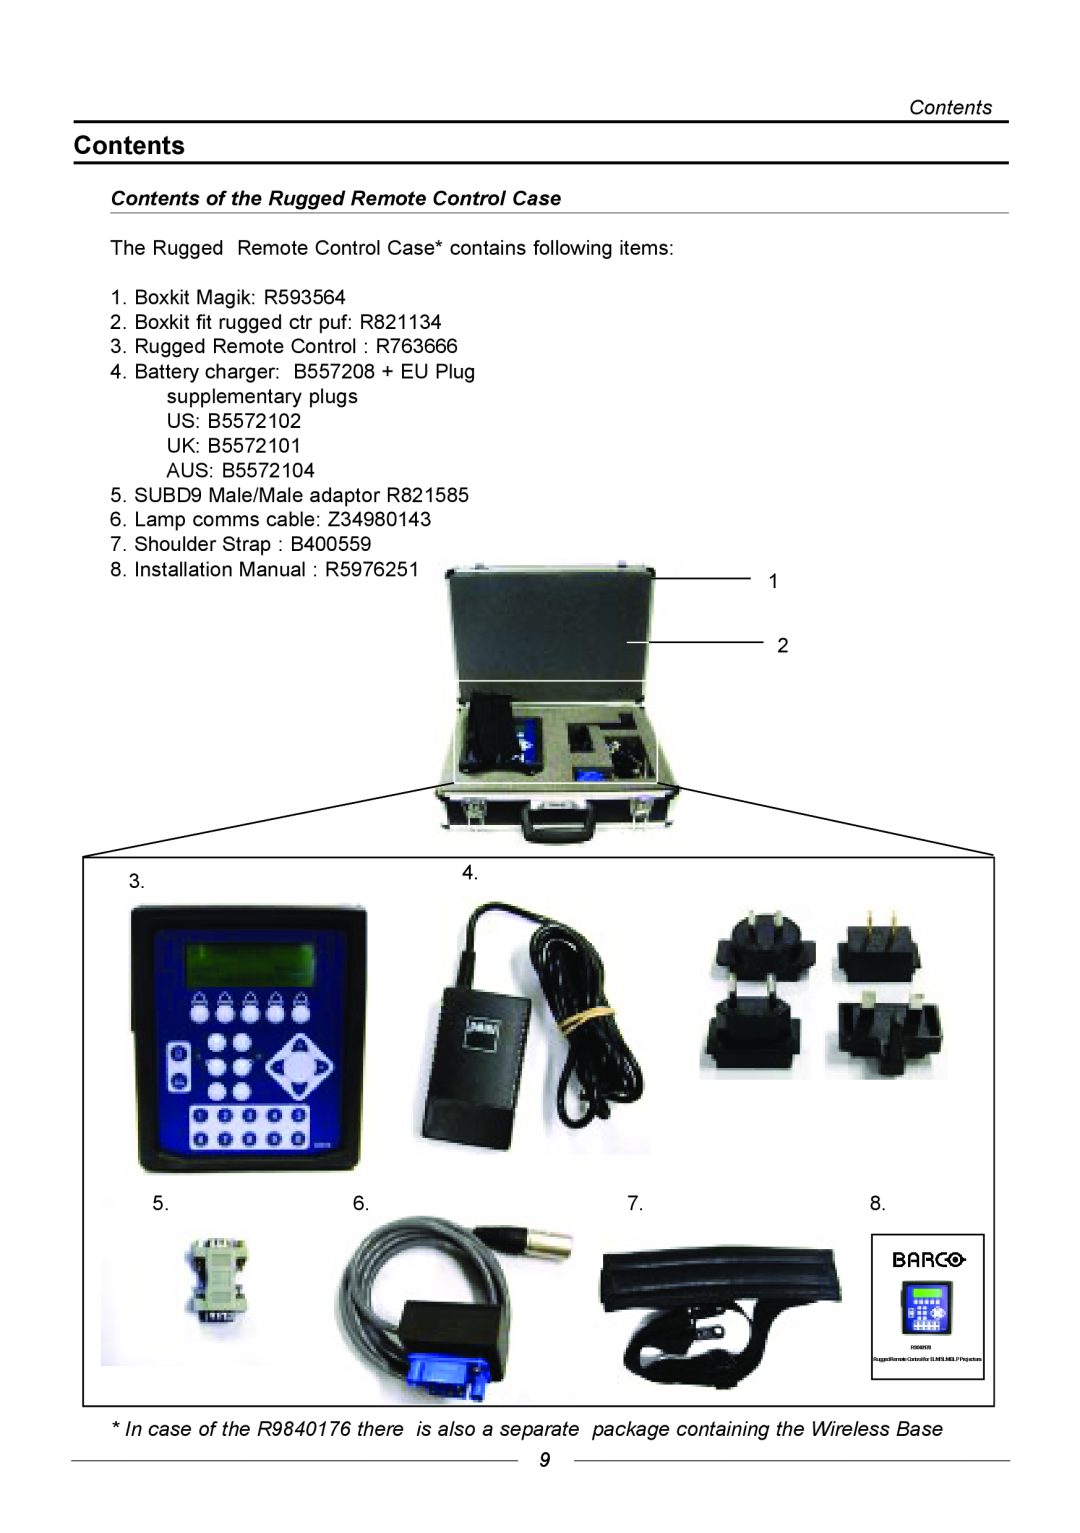 Barco R9840171, R9840170, R9840176 manual Contents of the Rugged Remote Control Case 